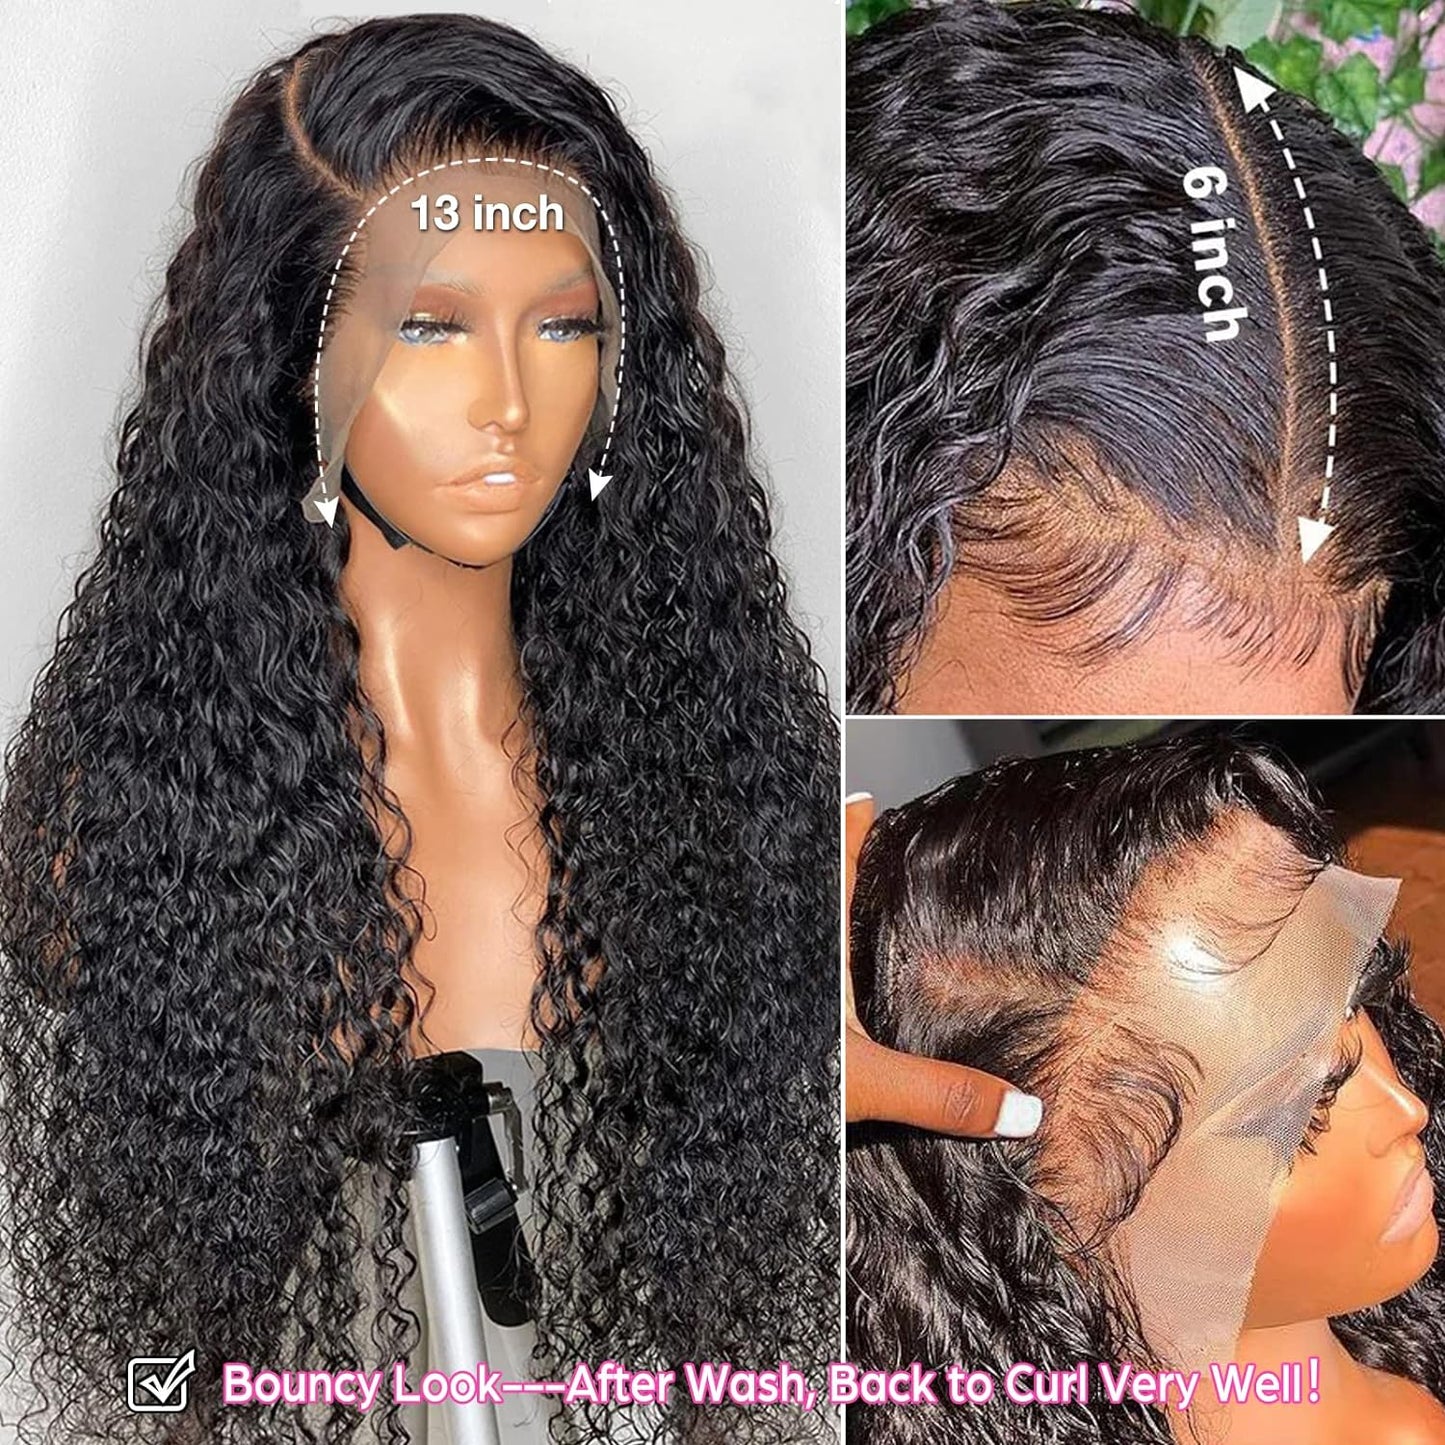 13x6 250 Density Hd Lace Front Wigs Human Hair, 13x6 Lace Front Wigs Human Hair, Wet And Wavy Lace Front Wigs Human Hair,Deep Wave Frontal Wigs For Black Women